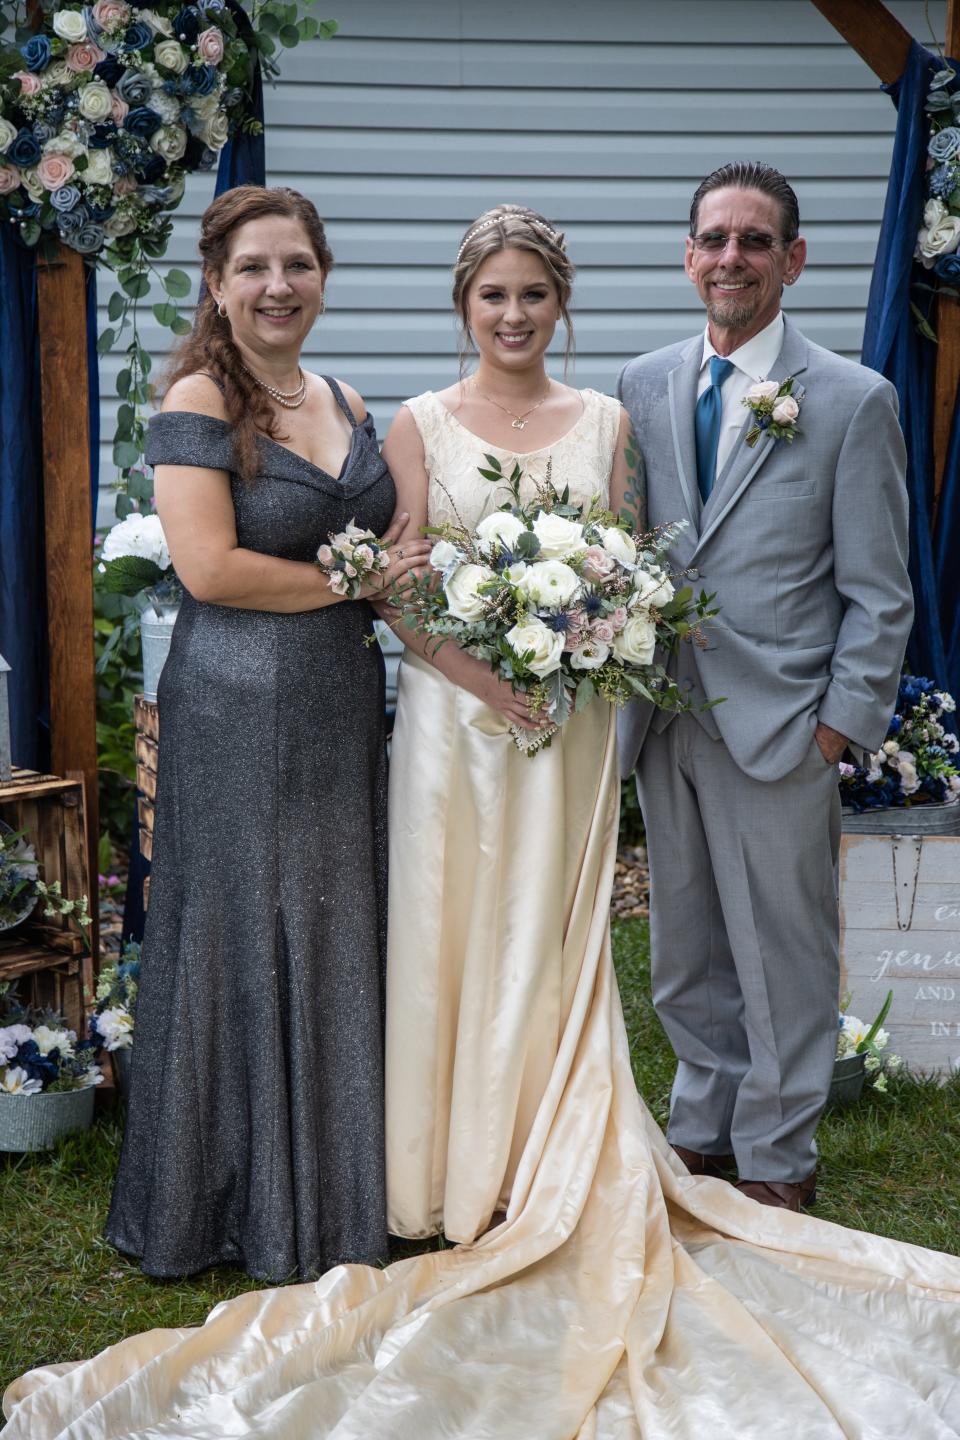 Cassie's dress wasn't the only family heirloom she wore on her wedding day.